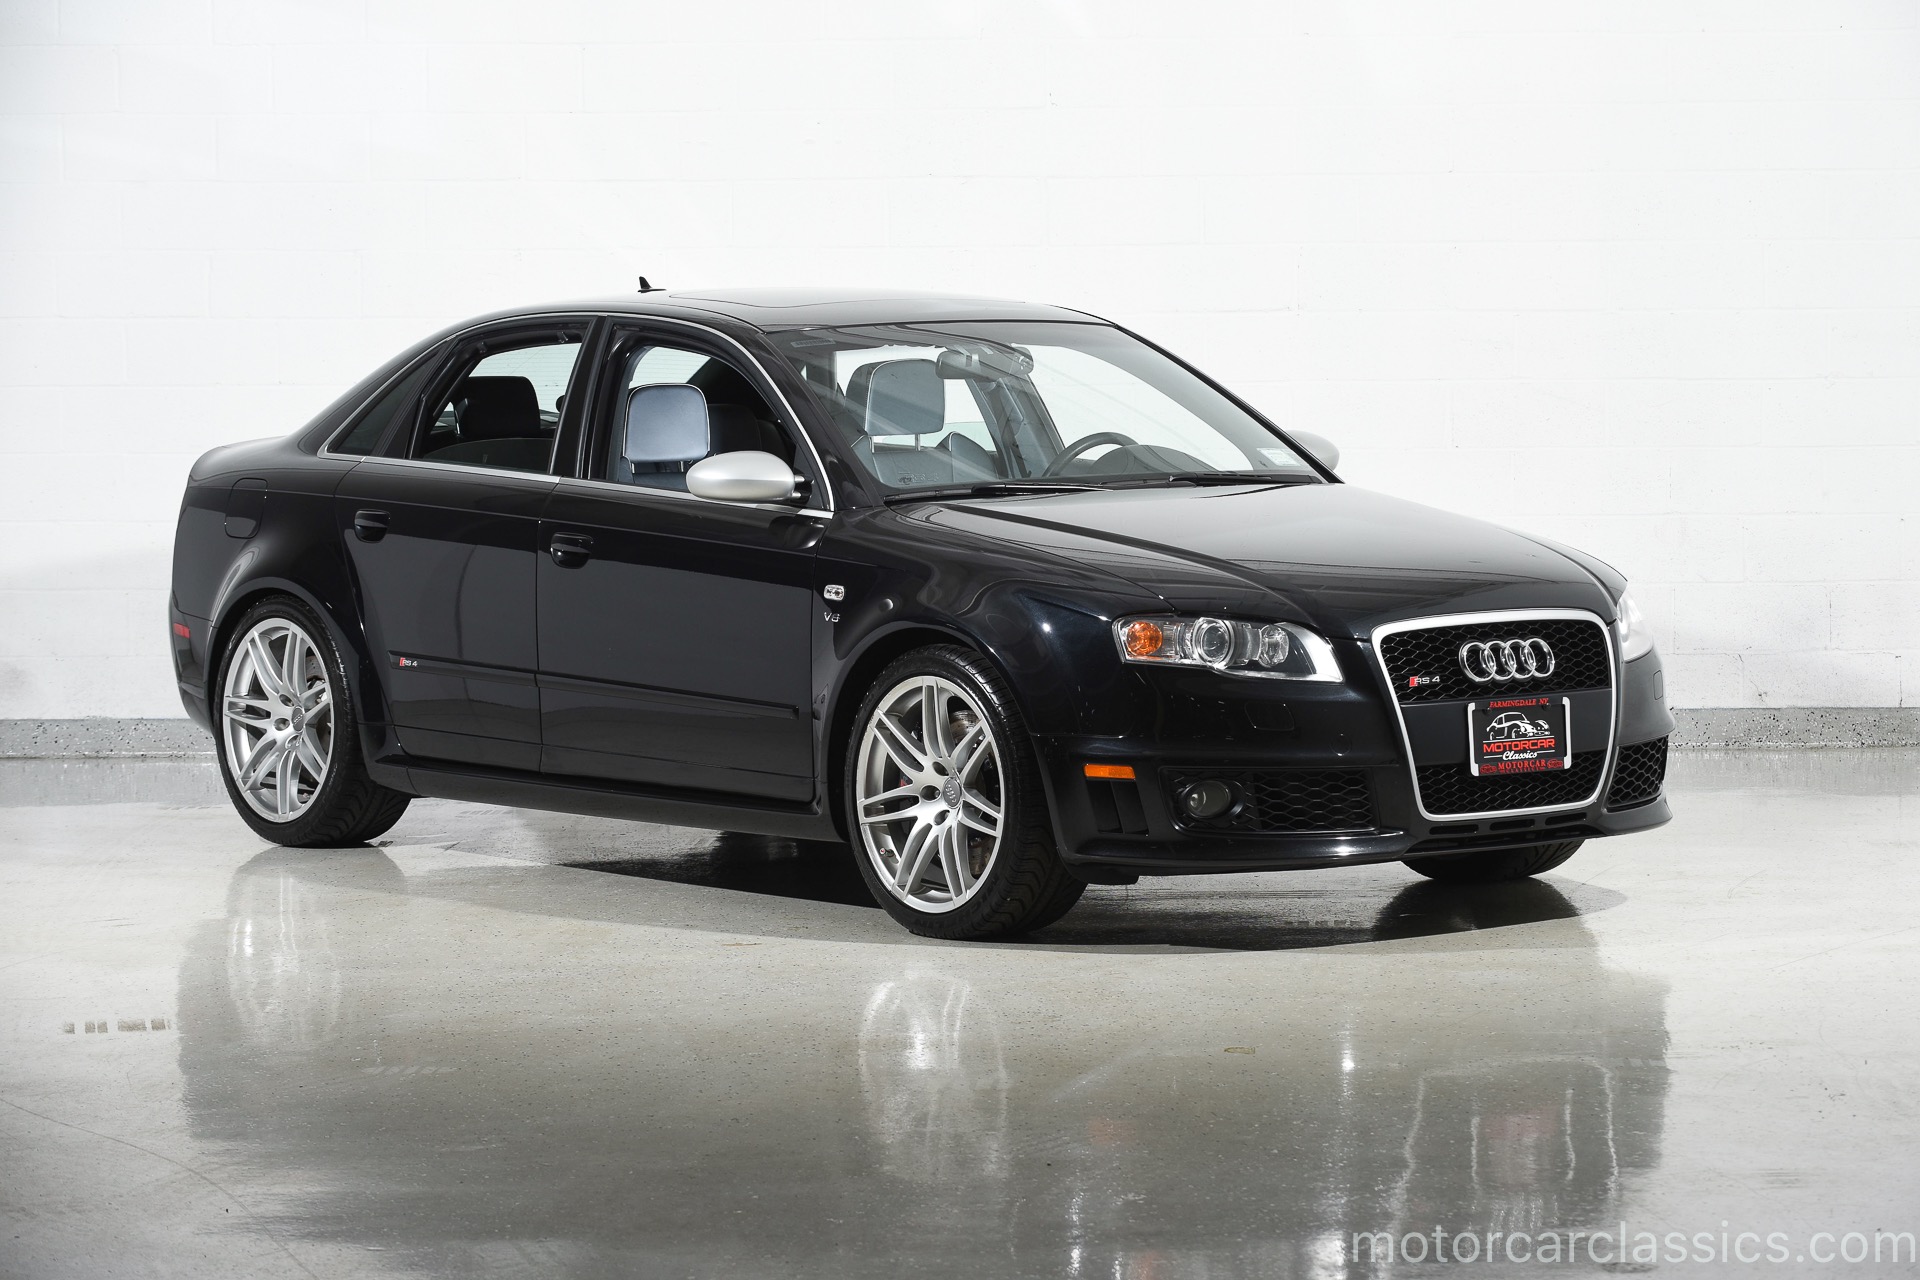 Used 2007 Audi RS 4 For Sale ($29,900) | Motorcar Classics Stock #1219